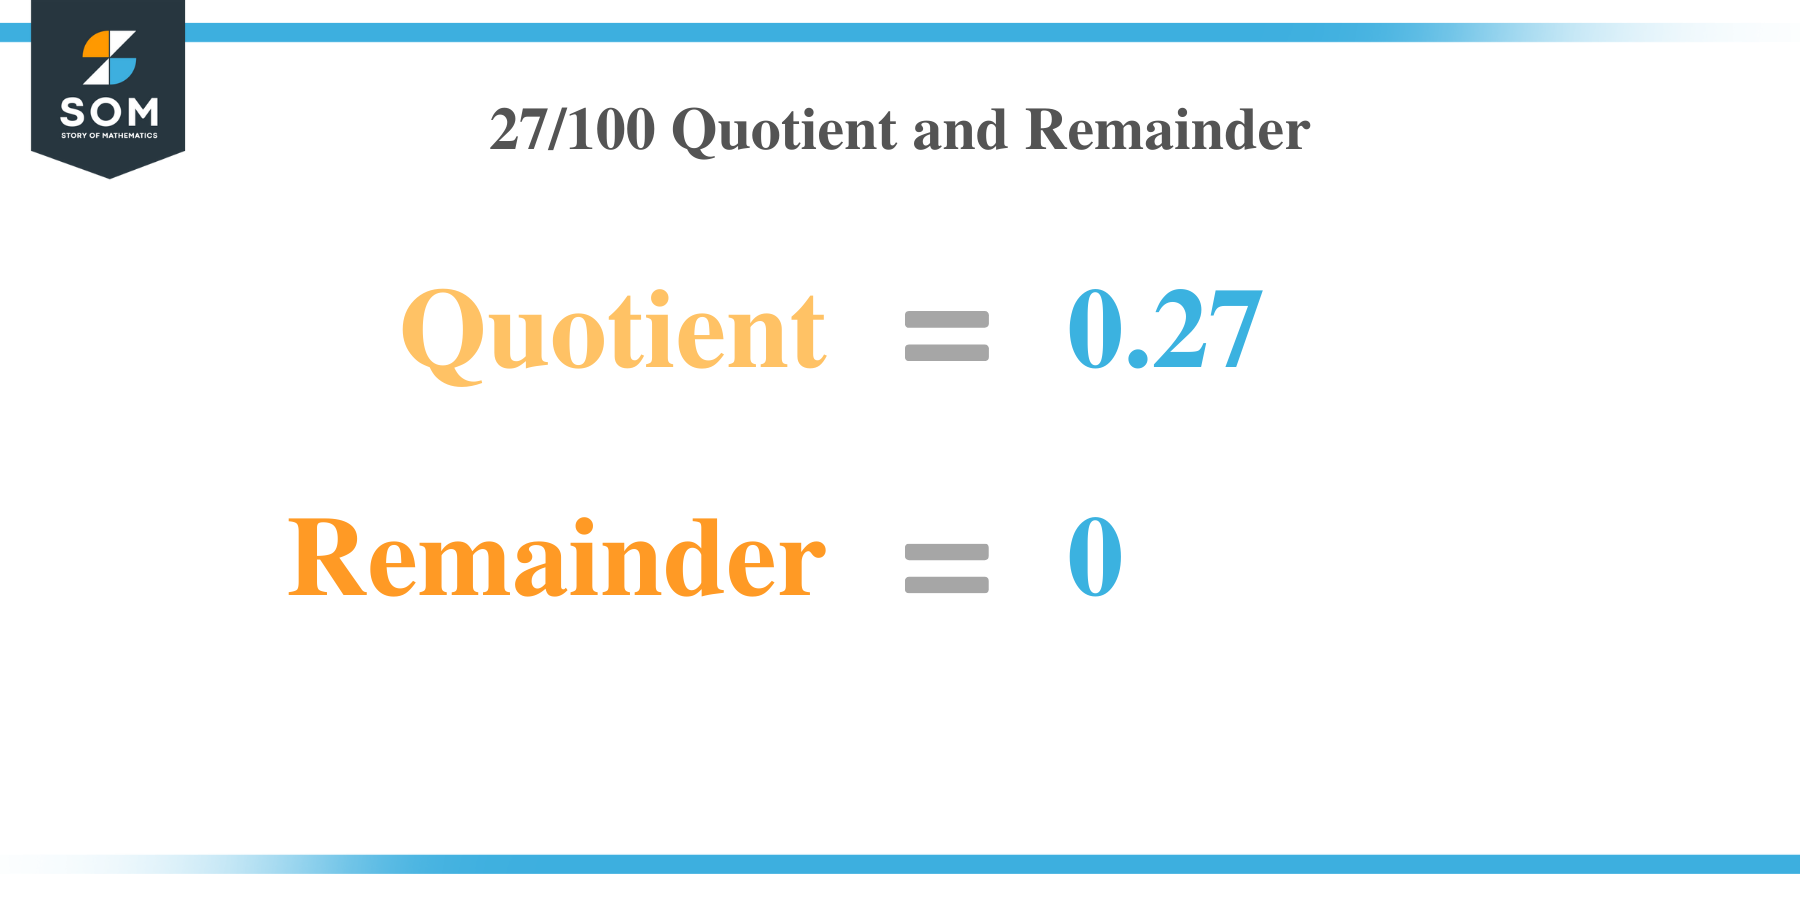 27 by 100 Quotient and Remainder